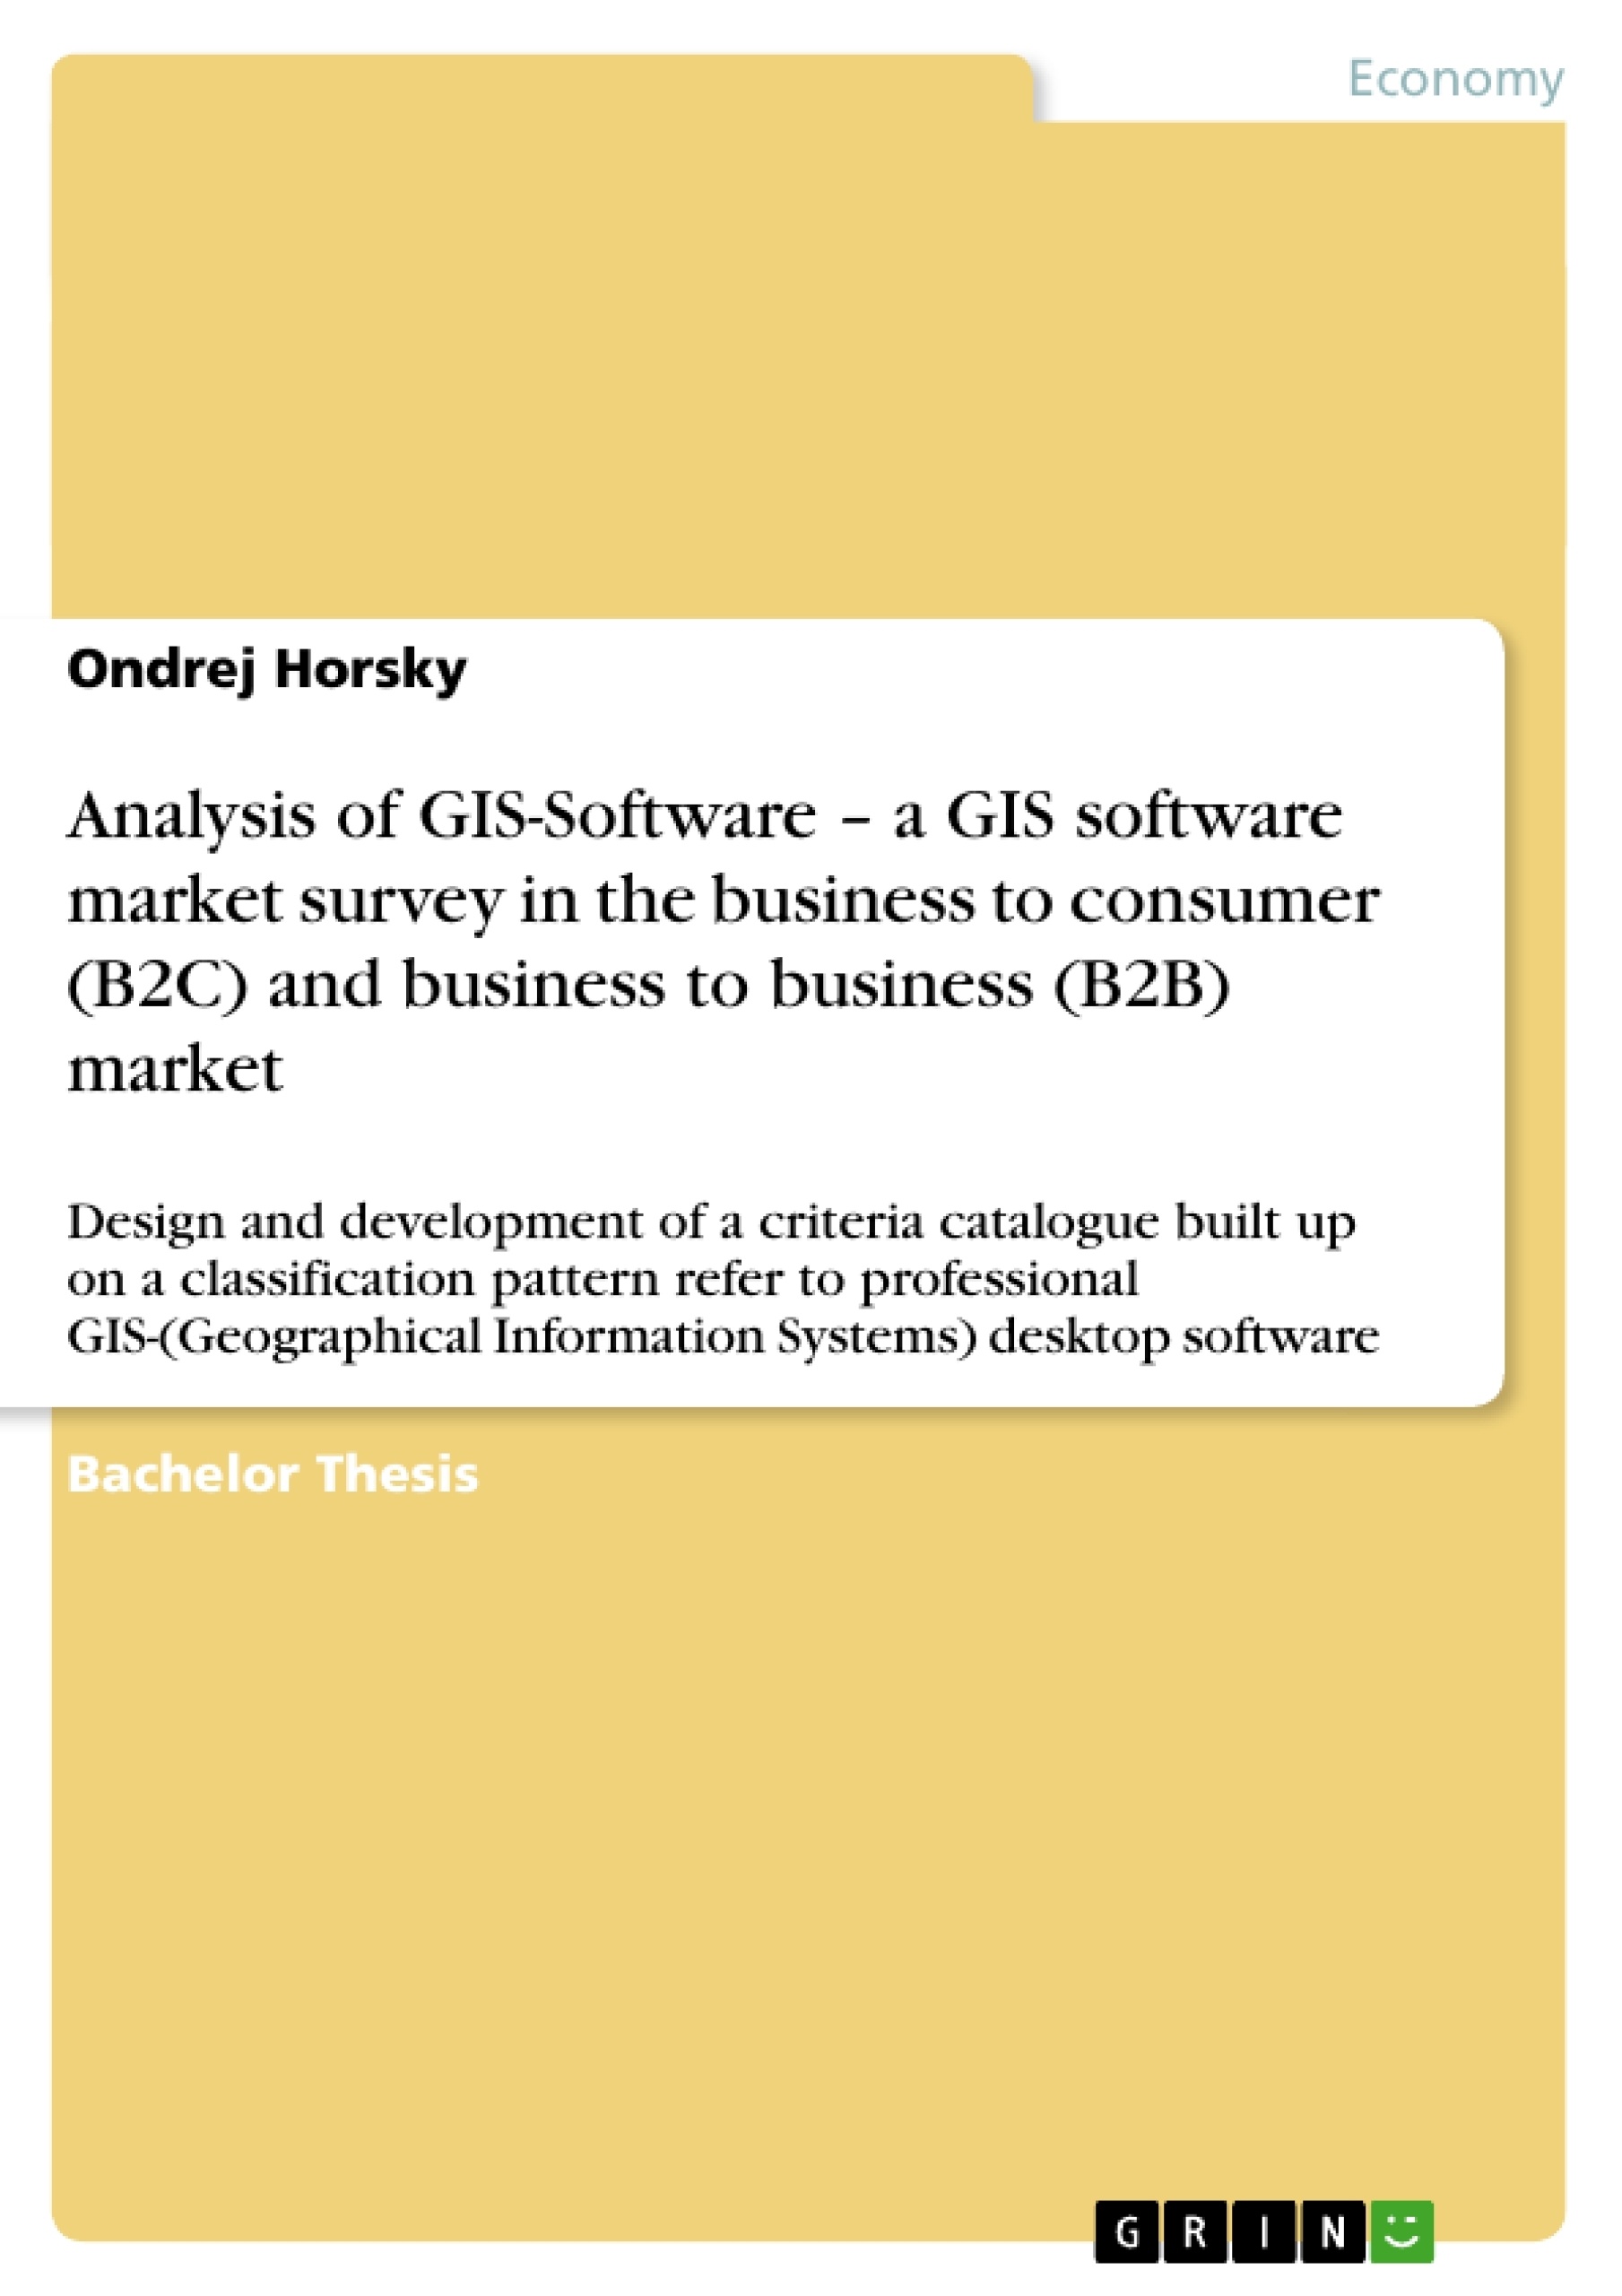 Title: Analysis of GIS-Software – a GIS software market survey in the business to consumer (B2C) and business to business (B2B) market